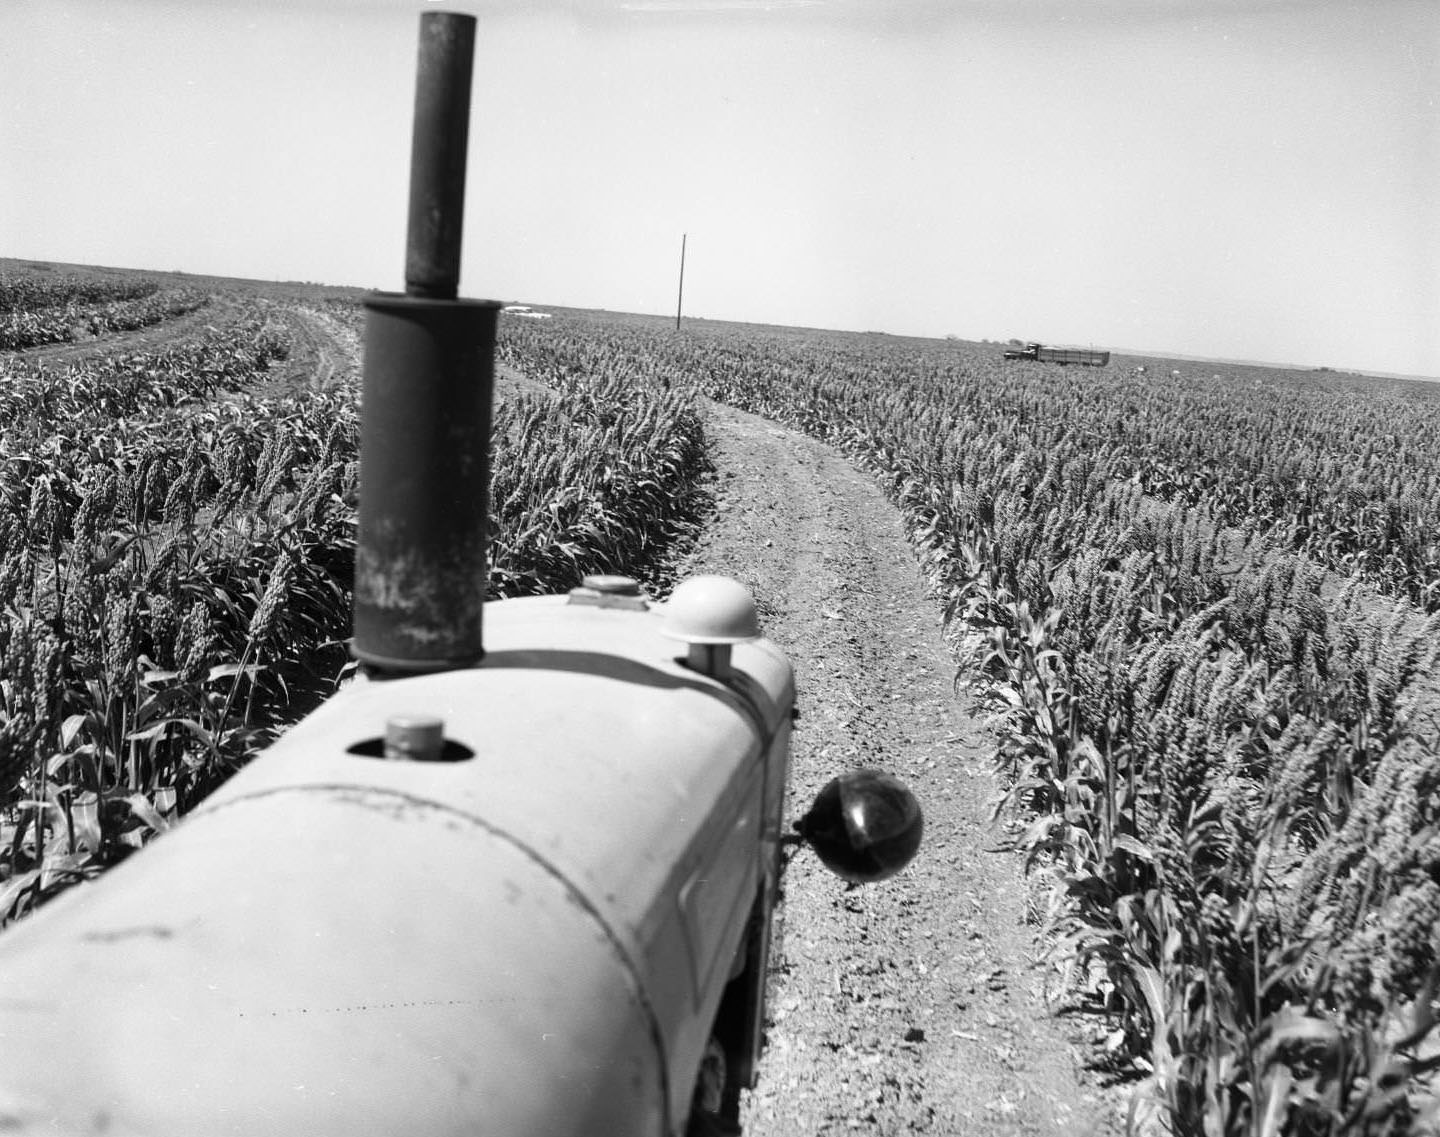 Tractor in Field of Crops, 1959